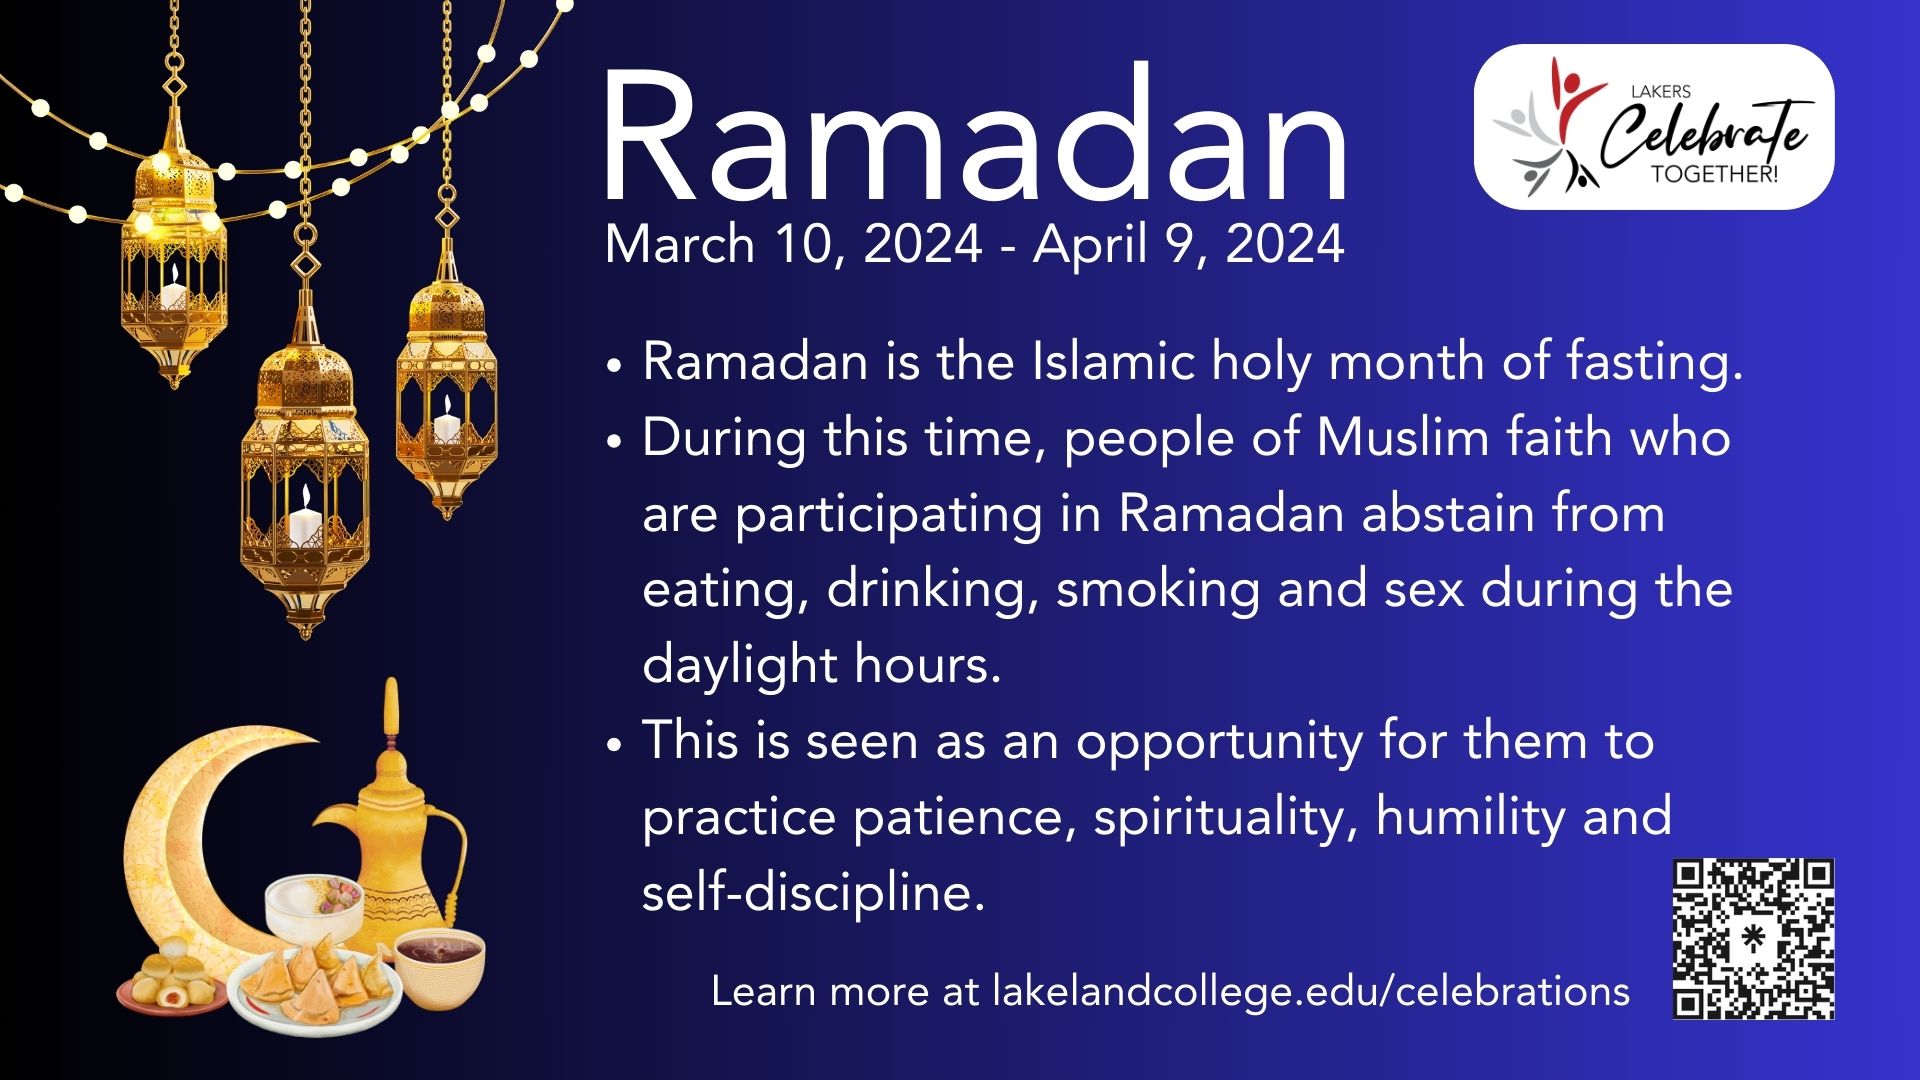 Ramadan, Lakers Celebrate Together Ramadan is the Islamic holy month of fasting. During this time, people of Muslim faith who are participating in Ramadan abstain from eating, drinking, smoking and sex during the daylight hours. This is seen as an opportunity for them to practice patience, spirituality, humility and self-discipline. Blue to black gradient background with gold lanterns and decorations